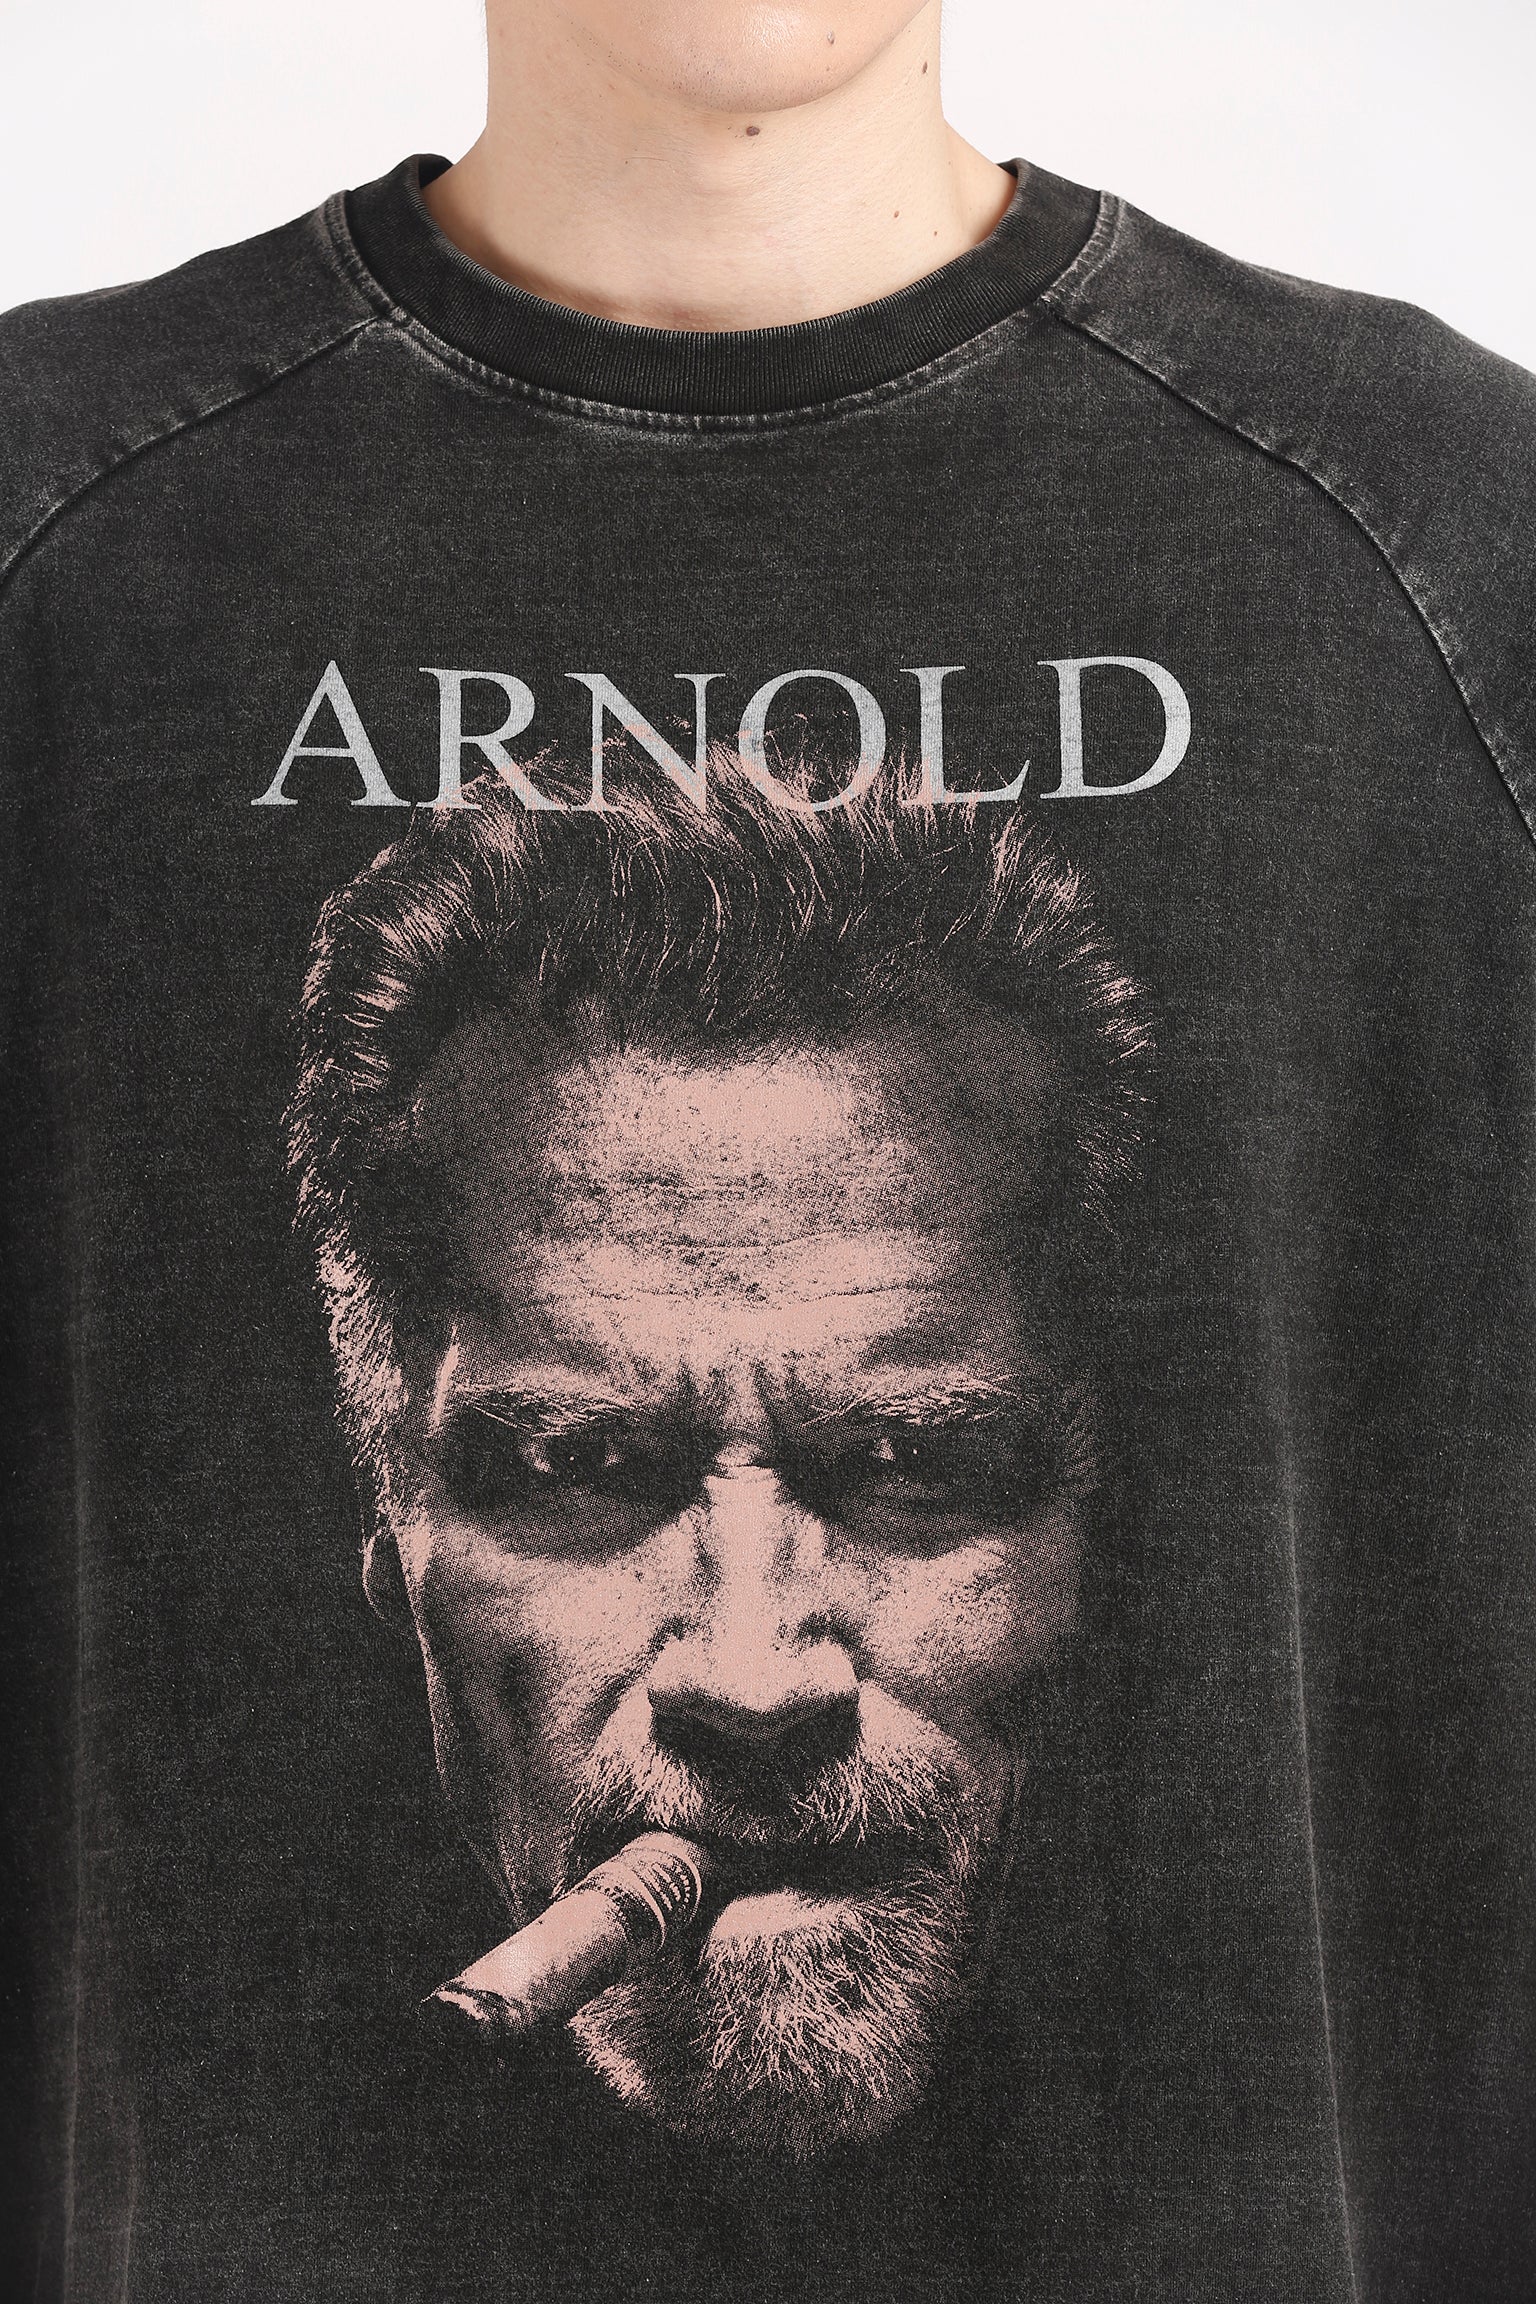 Musculo The legend Arnold collection